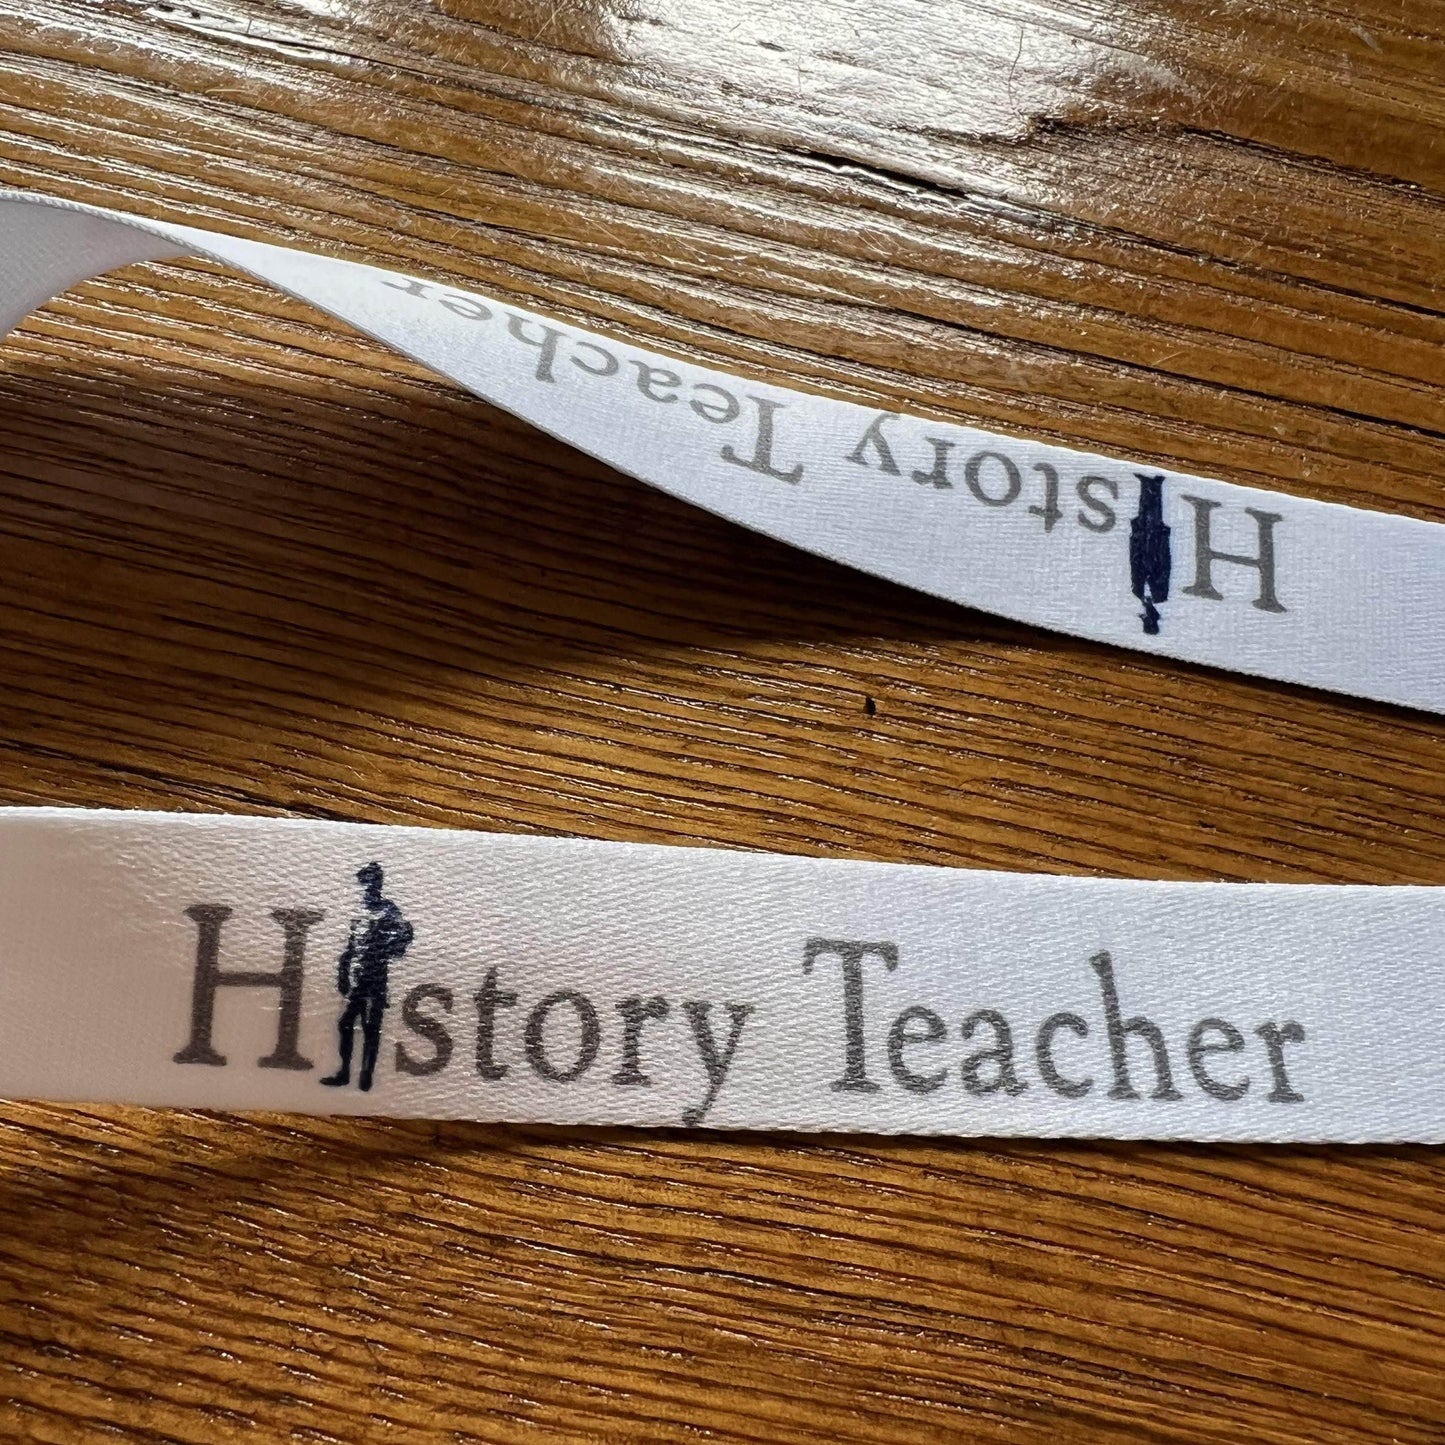 History Teacher Lanyard with Teddy Roosevelt  from the History List store